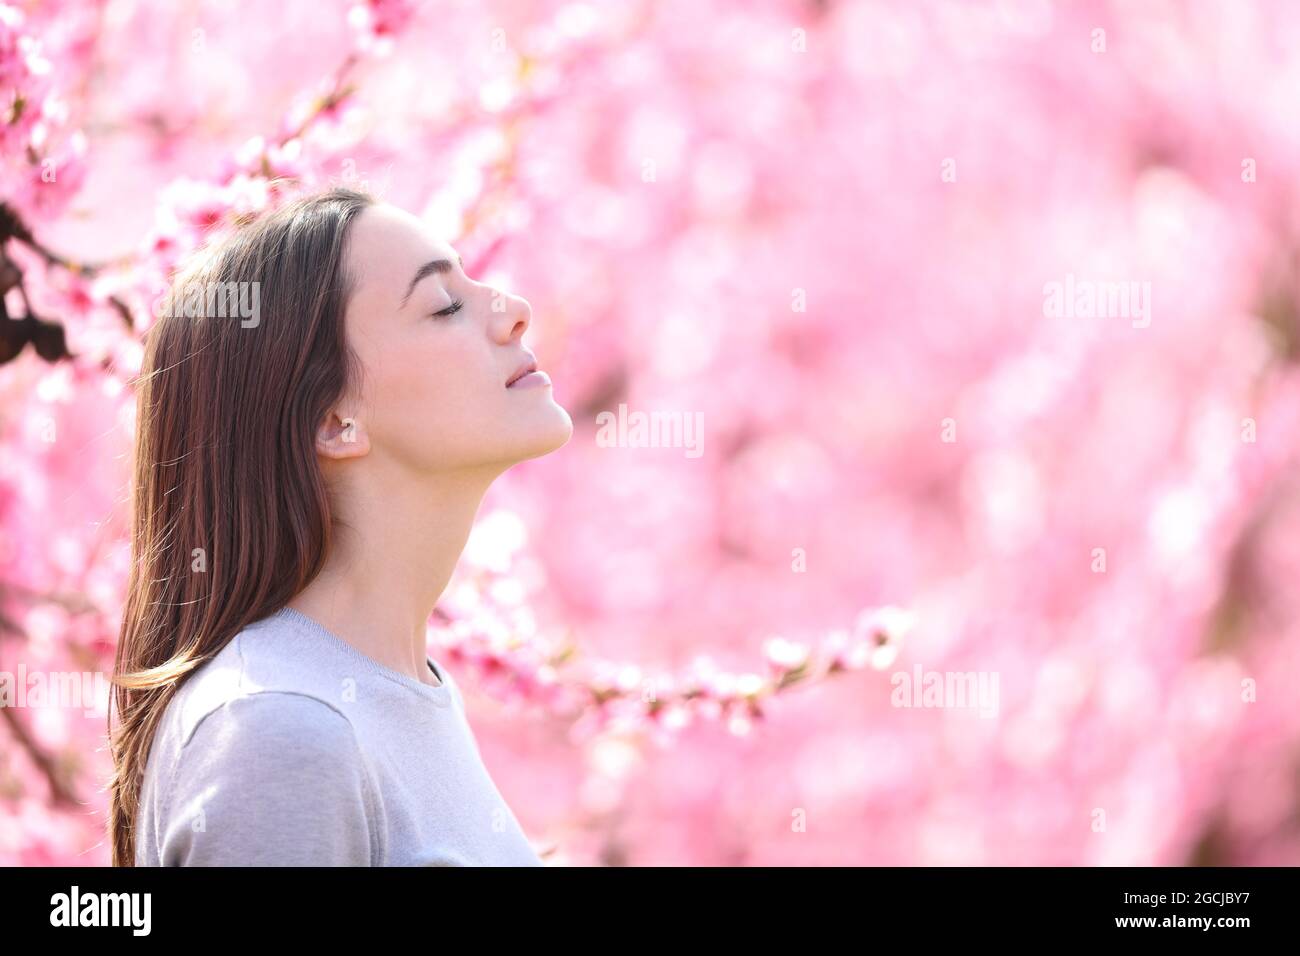 Side view portrait of a woman breathing and smelling scented flowers in a pink field Stock Photo